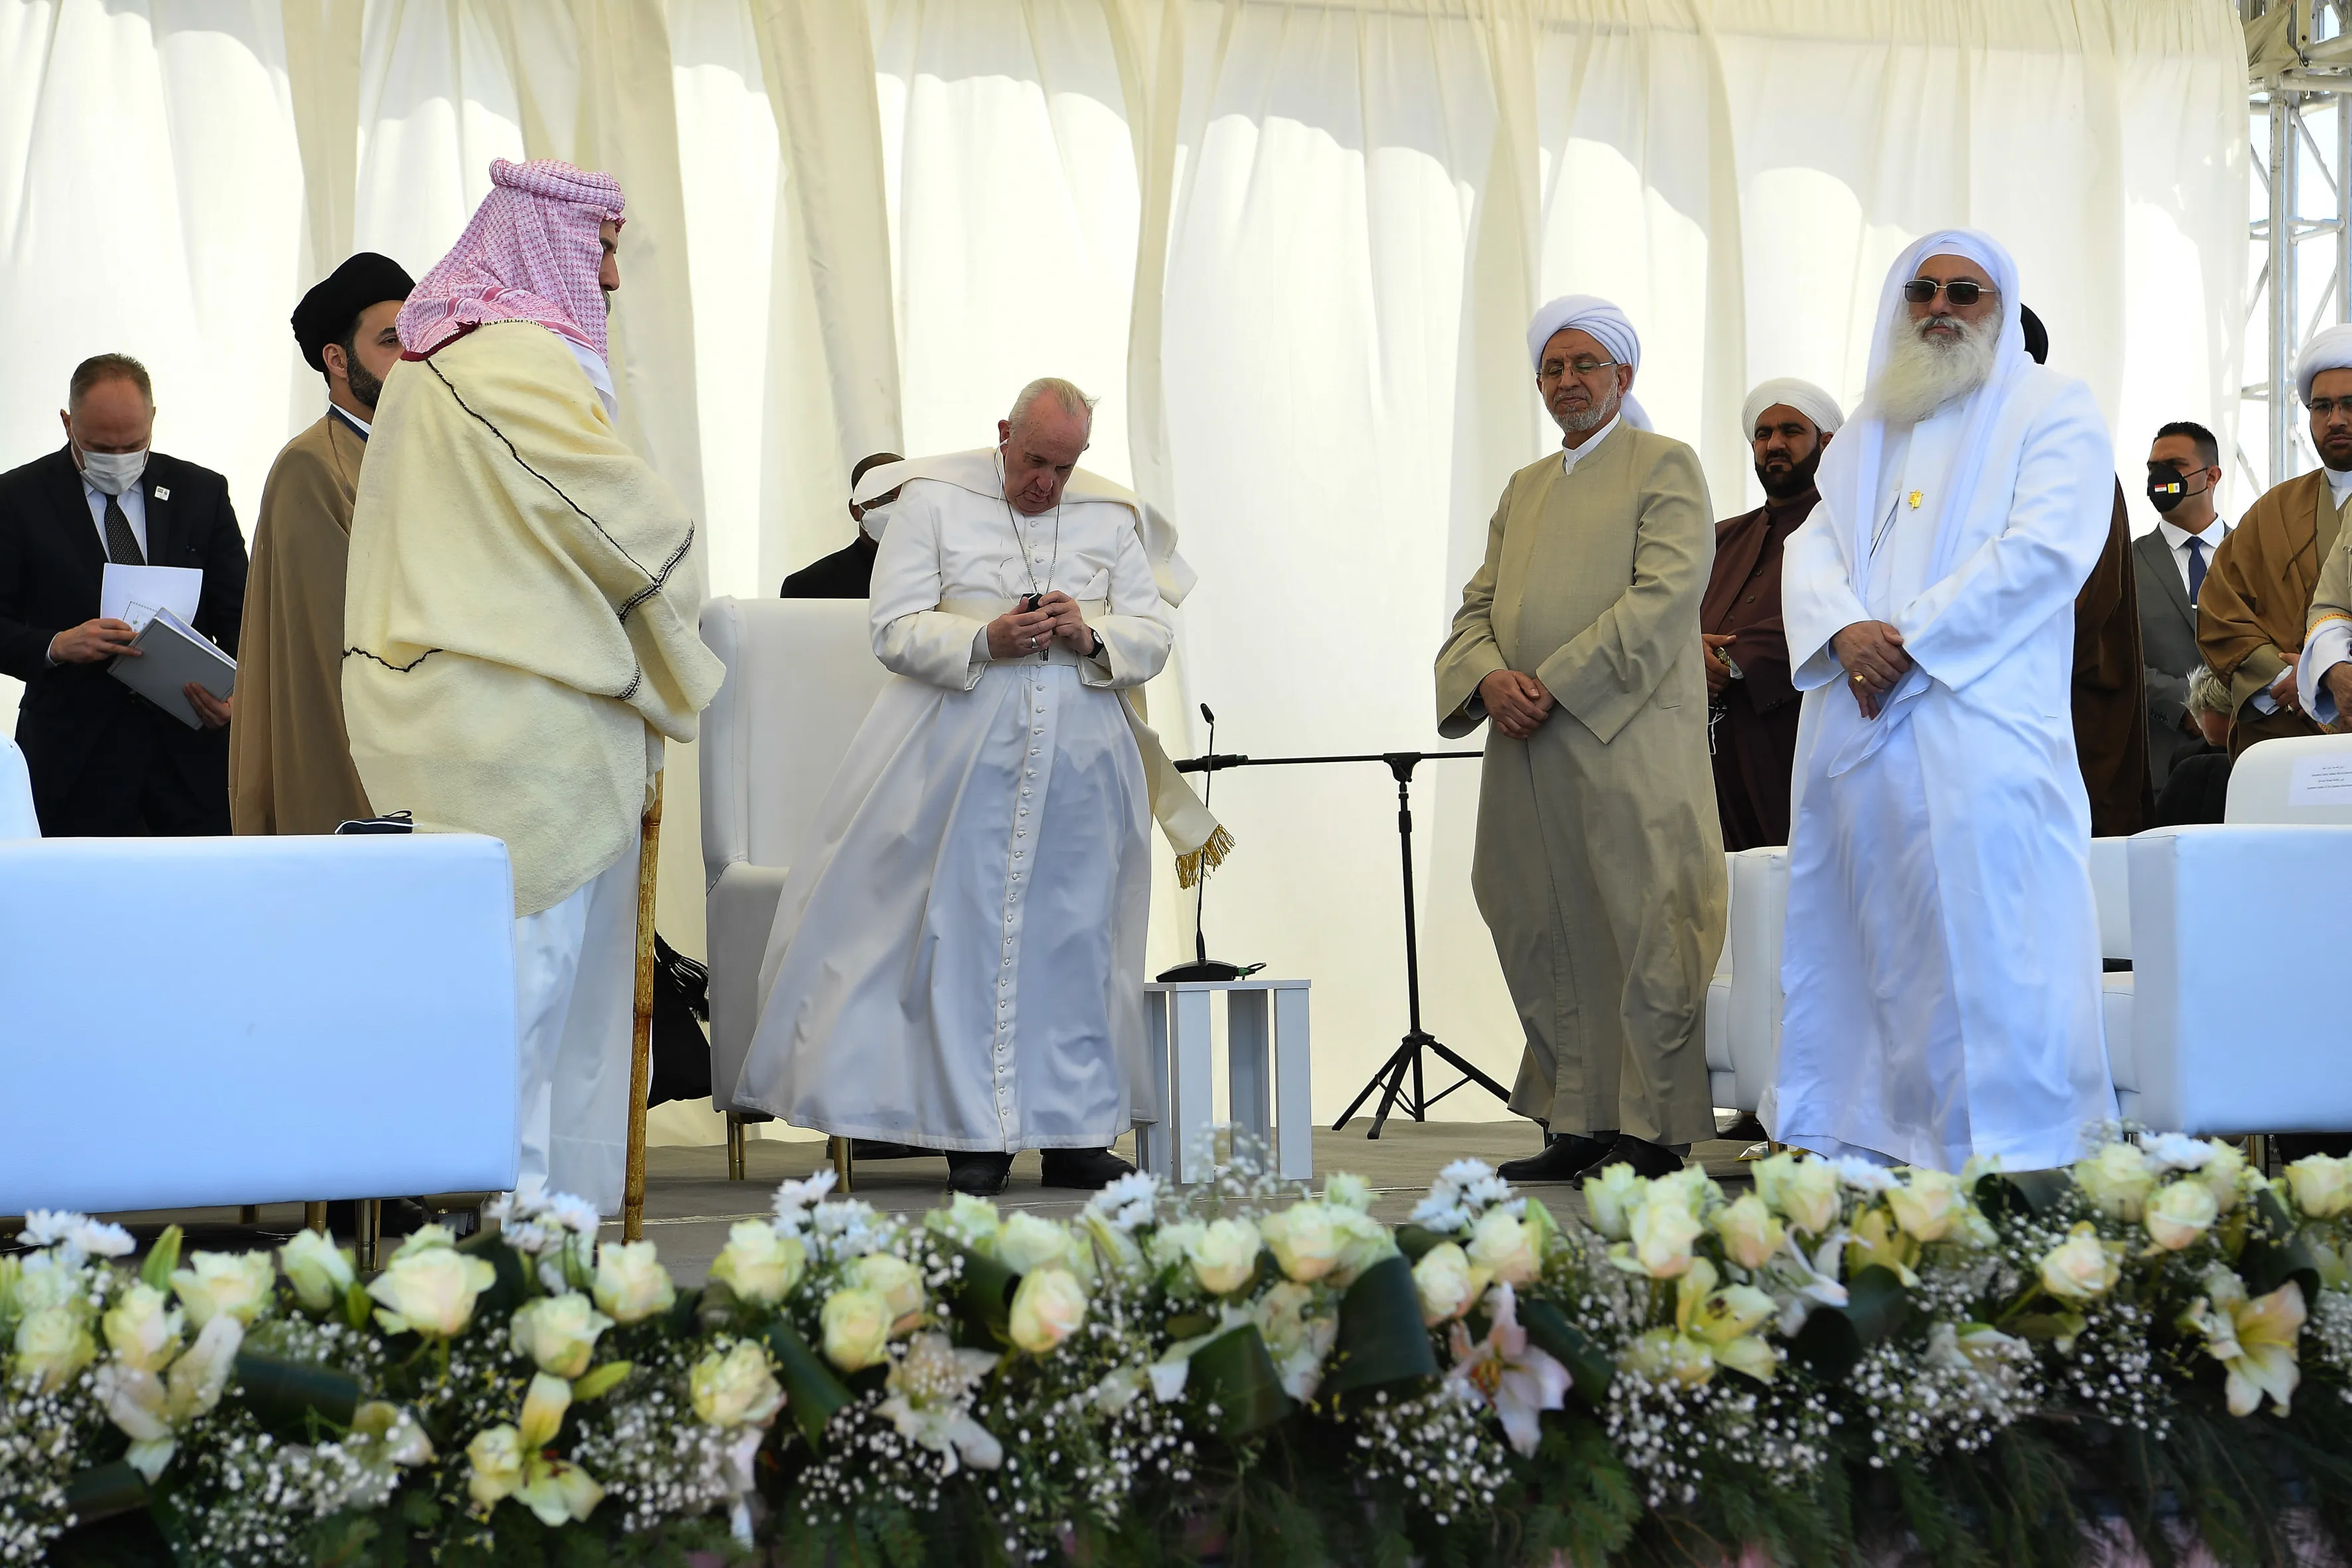 Pope Francis participates in an interreligious meeting at the site of Ur, outside Nasiriyah, Iraq, March 6, 2021.?w=200&h=150